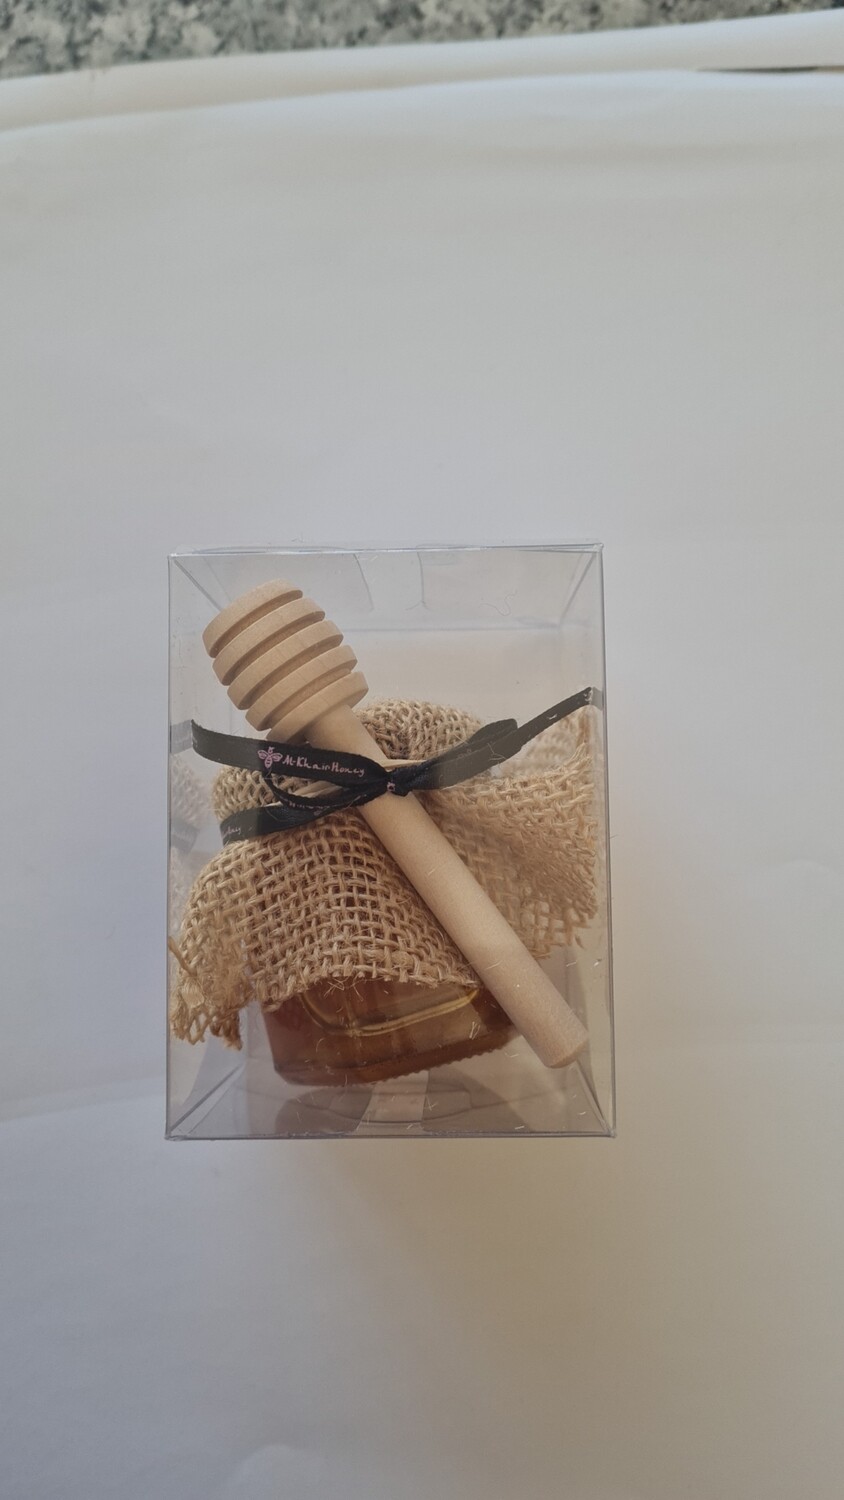 60g Honey Favor, with clear box, Hessian  cloth and wooden dipper